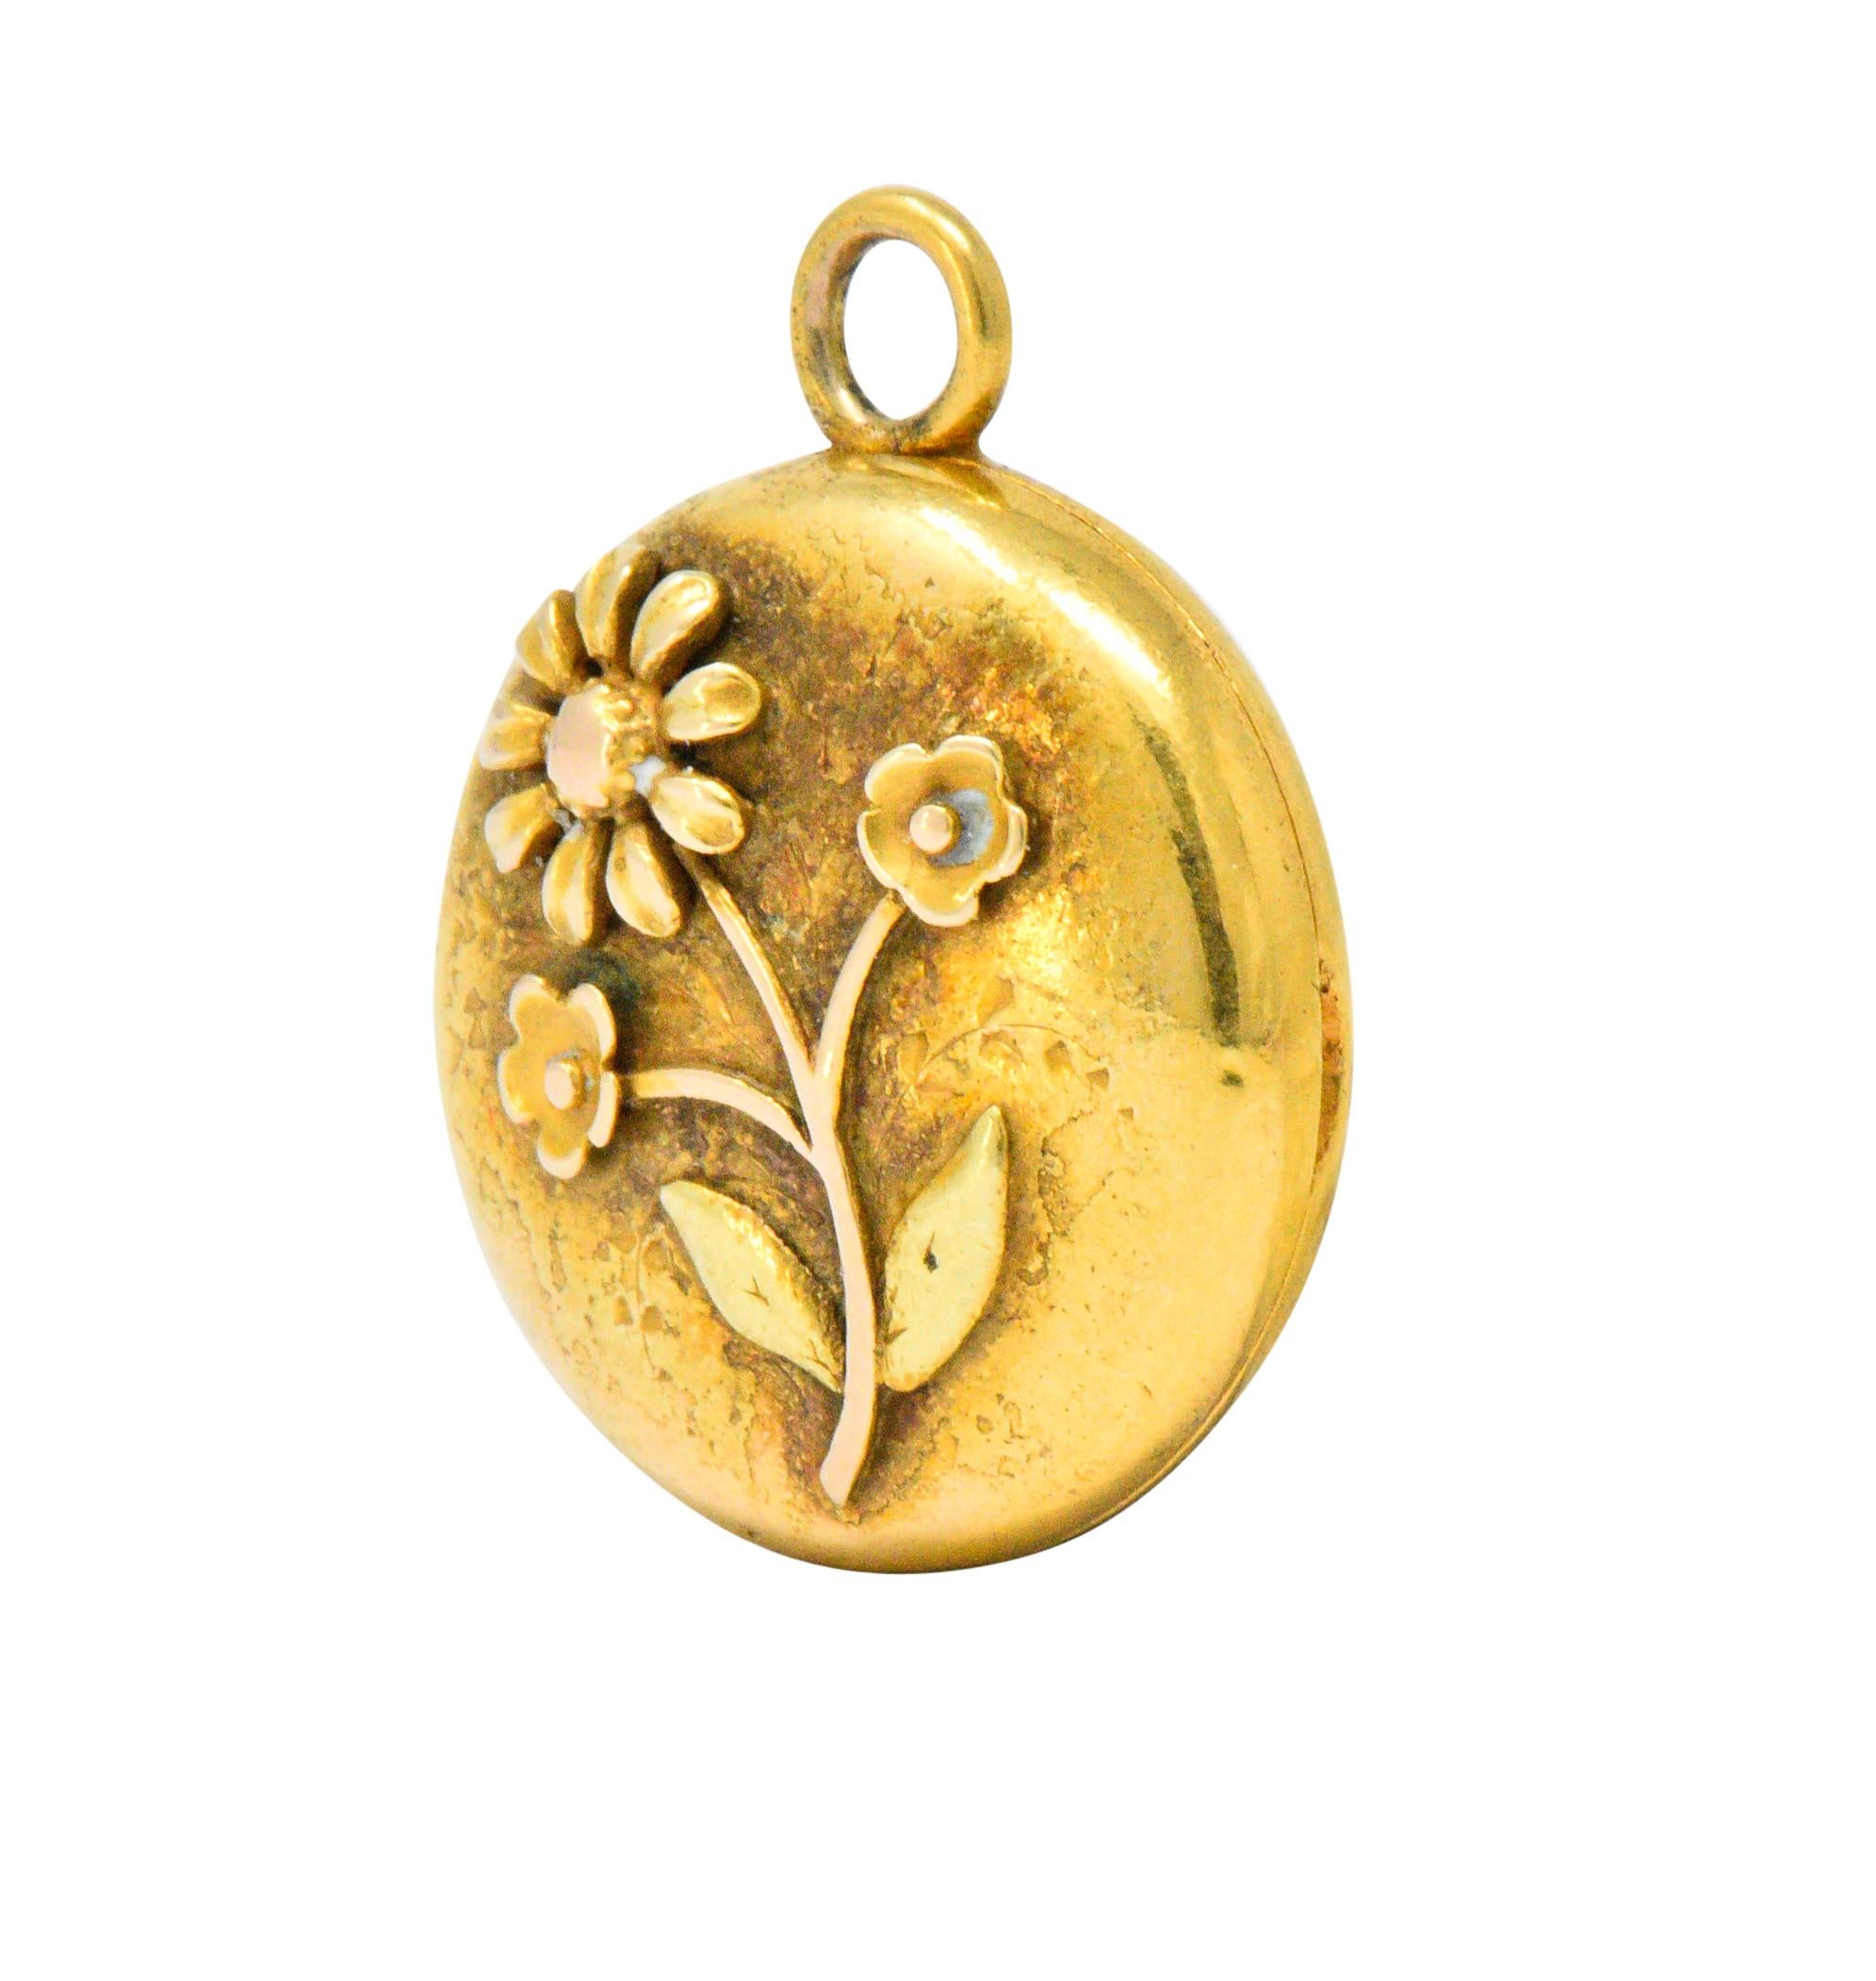 Sweet yellow gold round locket

With an applied yellow, rose and green gold flower

Engraved bird and foliate motif on verso

Opens to reveal a small frame

Tested as 14 karat gold

Diameter: 5/8 Inch

Length: 3/4 Inch

Total Weight: 3.9